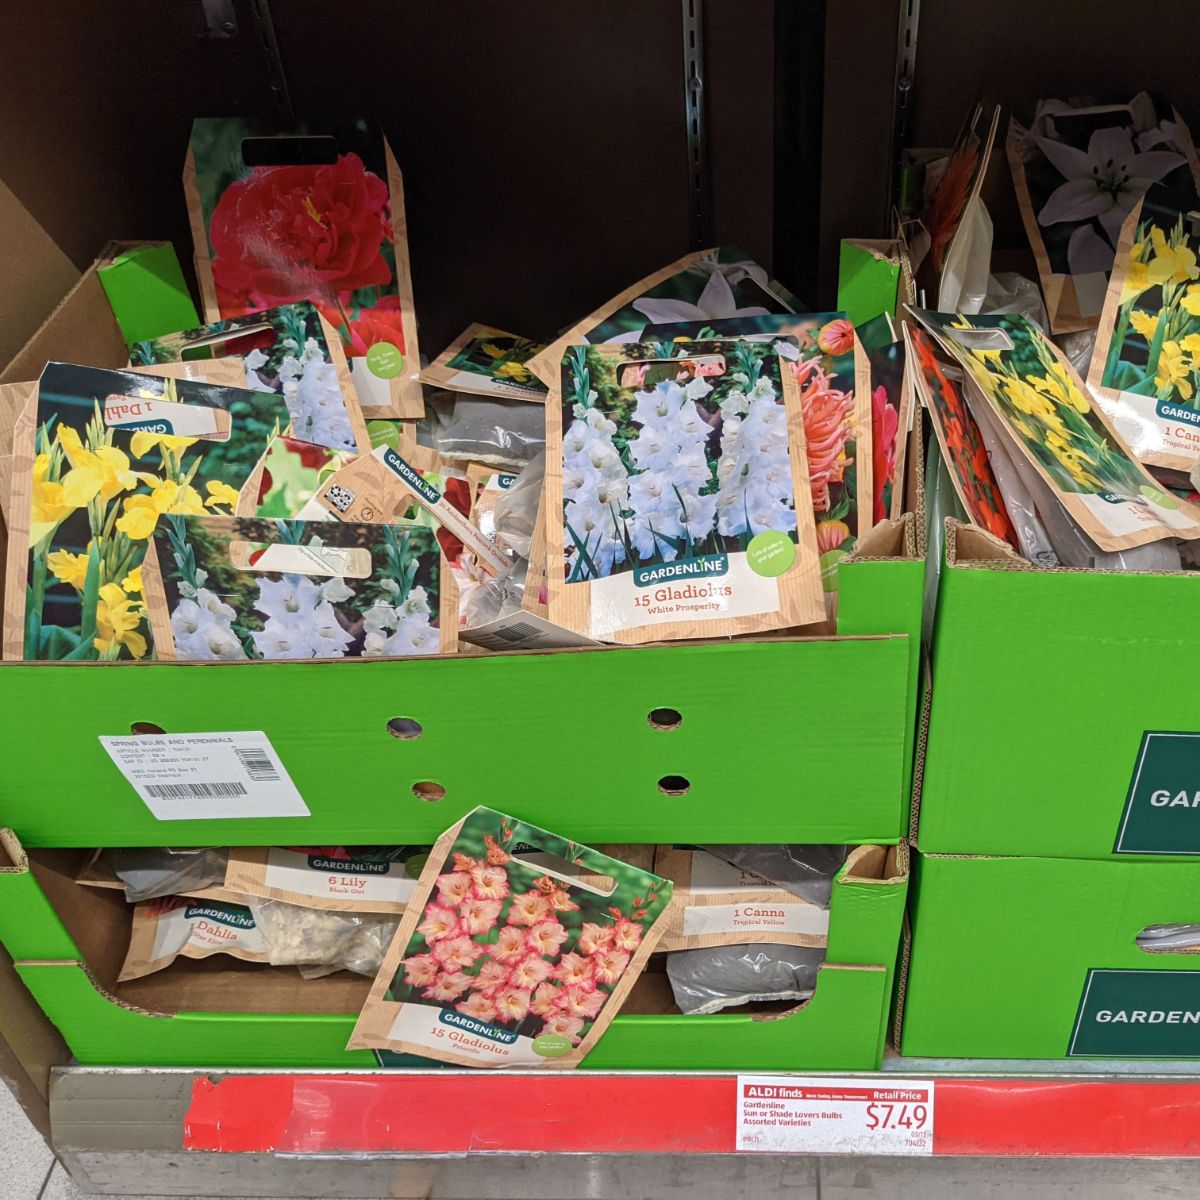 Big selection of flower bulbs for sale at Aldi - April 6, 2022